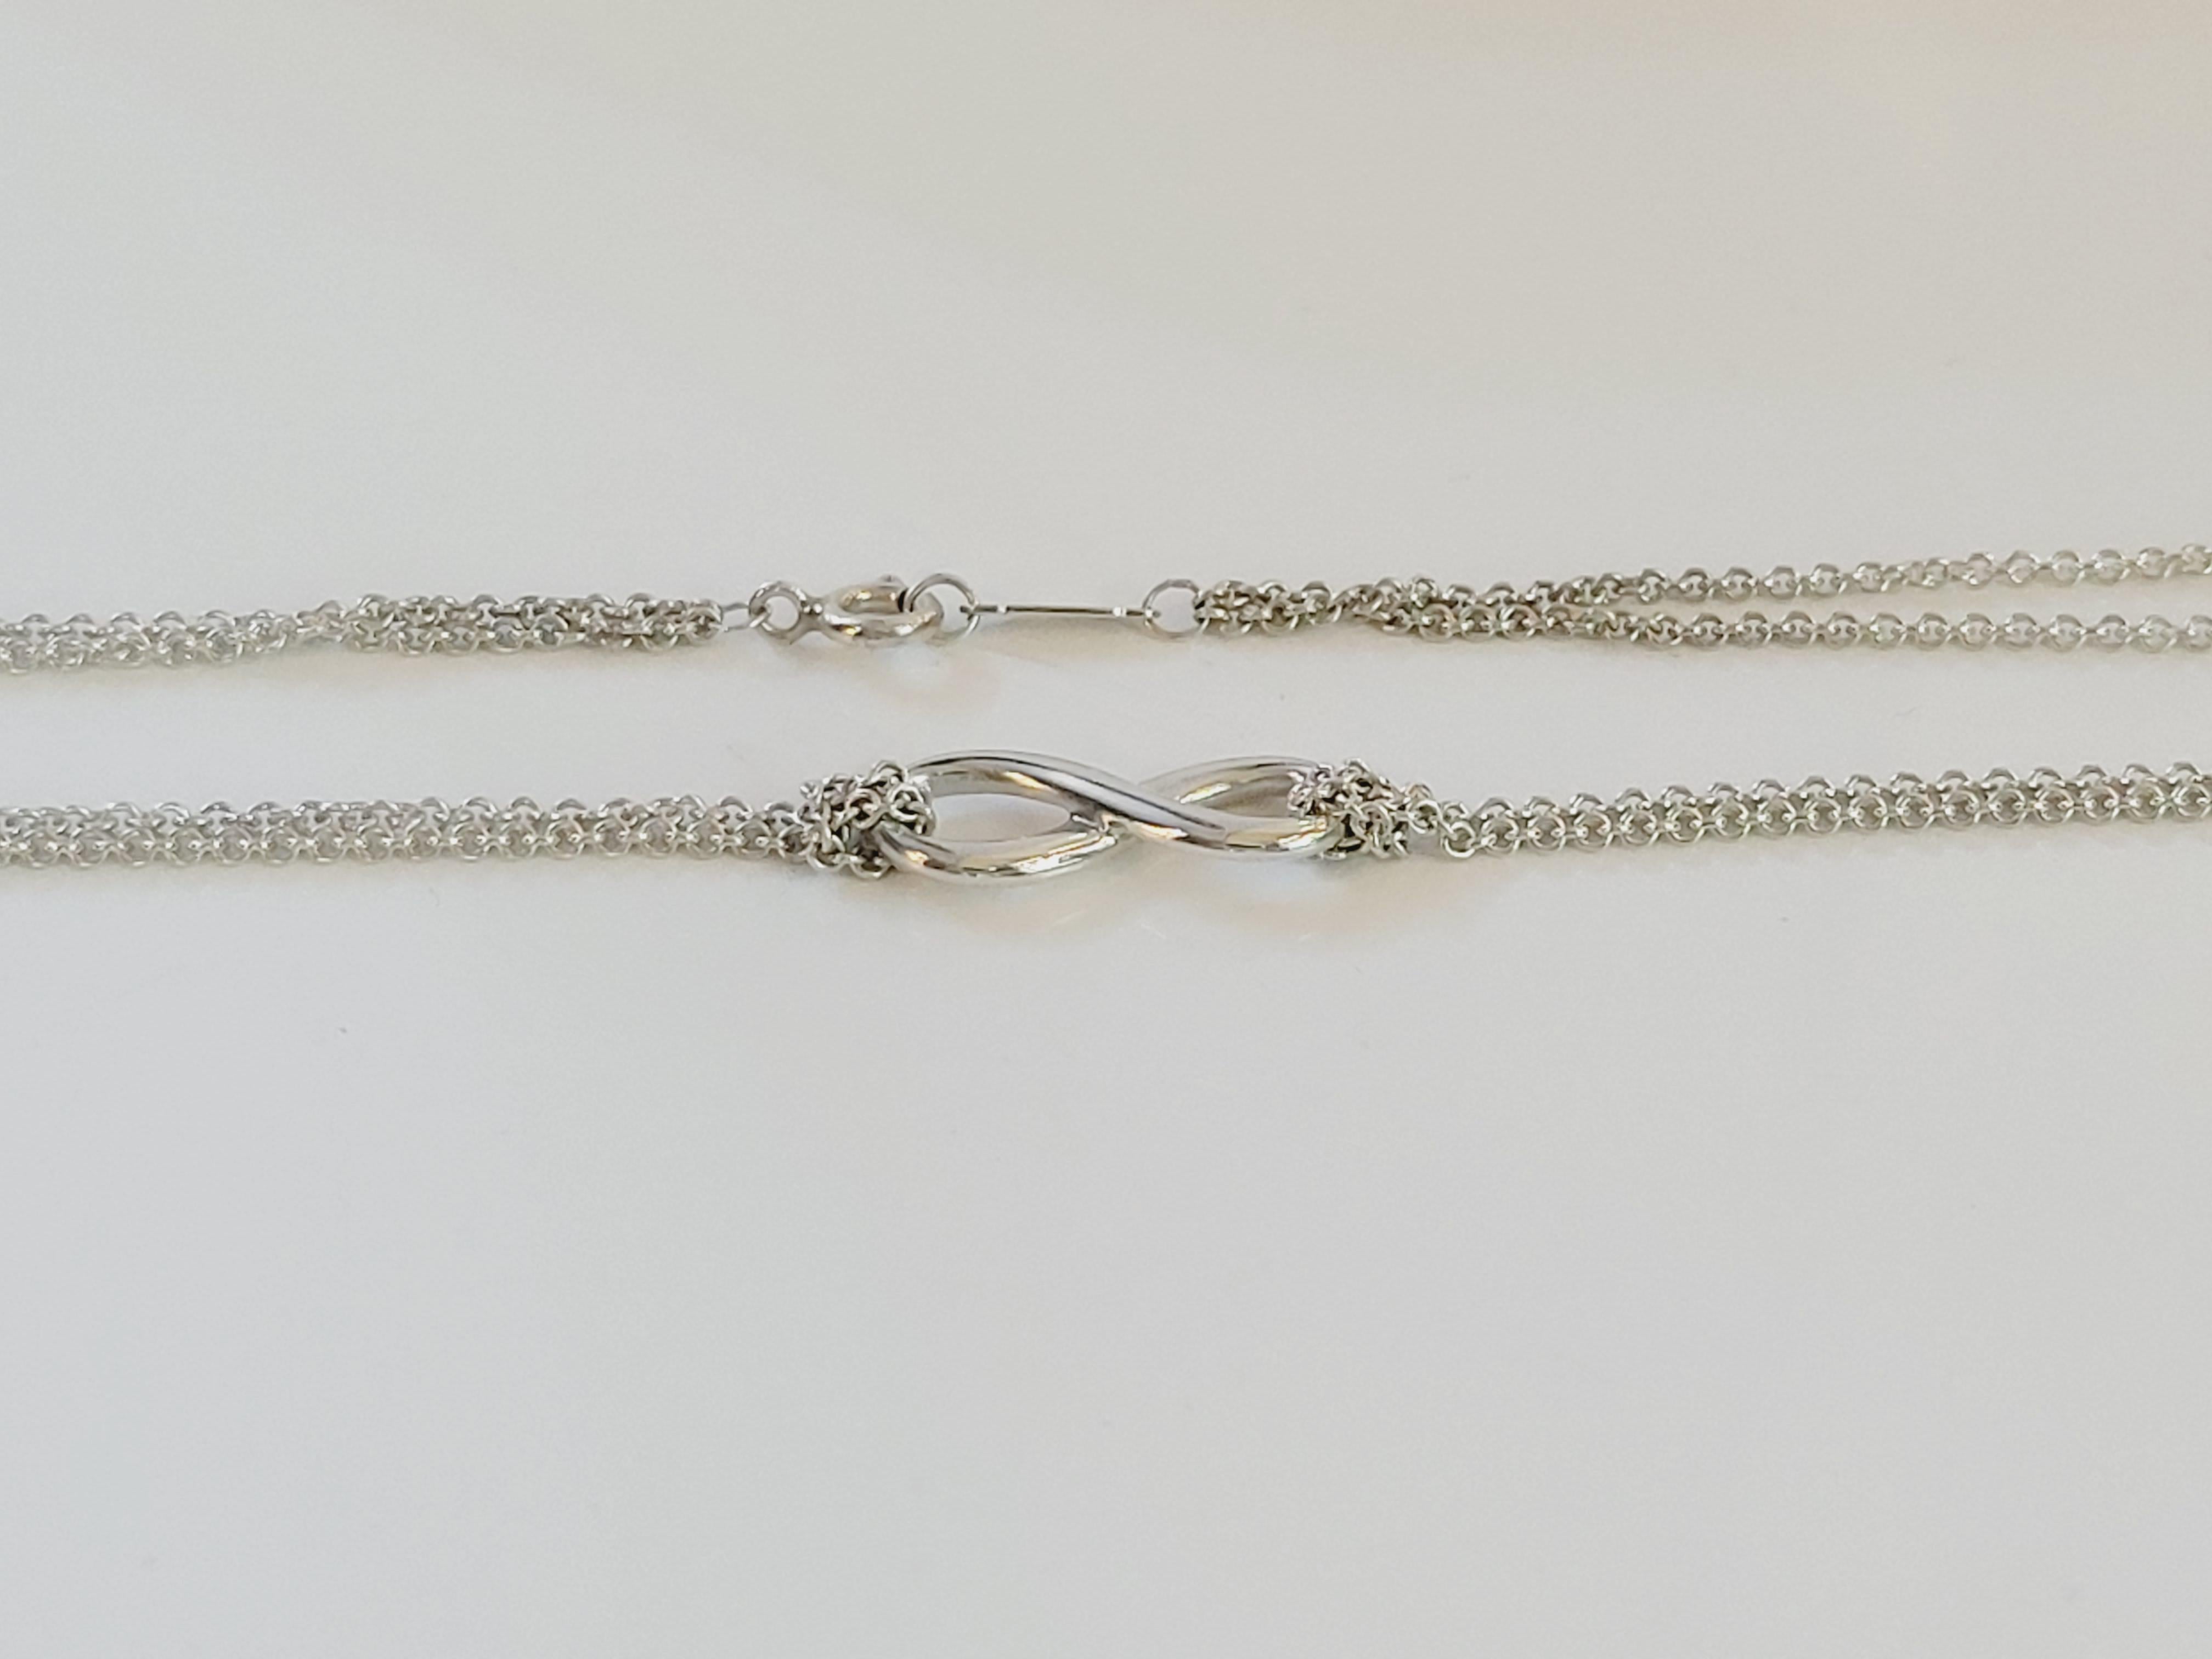 Brand Tiffany & co 
Type chain pendant
Gender women
Material sterling silver
Metal purity 925
Pendant width 8
length 20mm
Weight 6.3gr
Chain length 16''
Comes with tiffany & co original box  